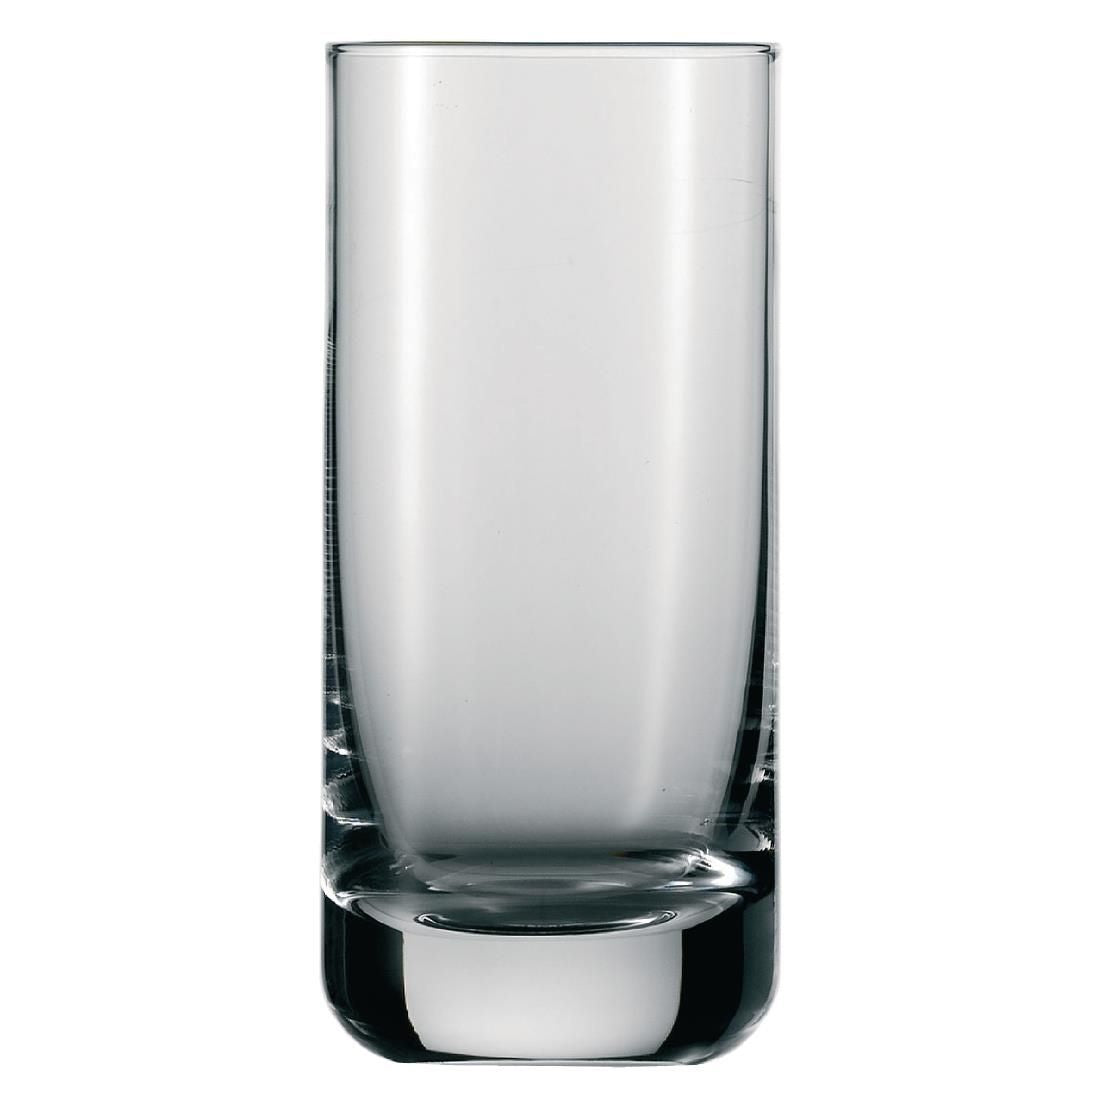 CC694 Schott Zwiesel Convention Crystal Hi Ball Glasses 345ml (Pack of 6)